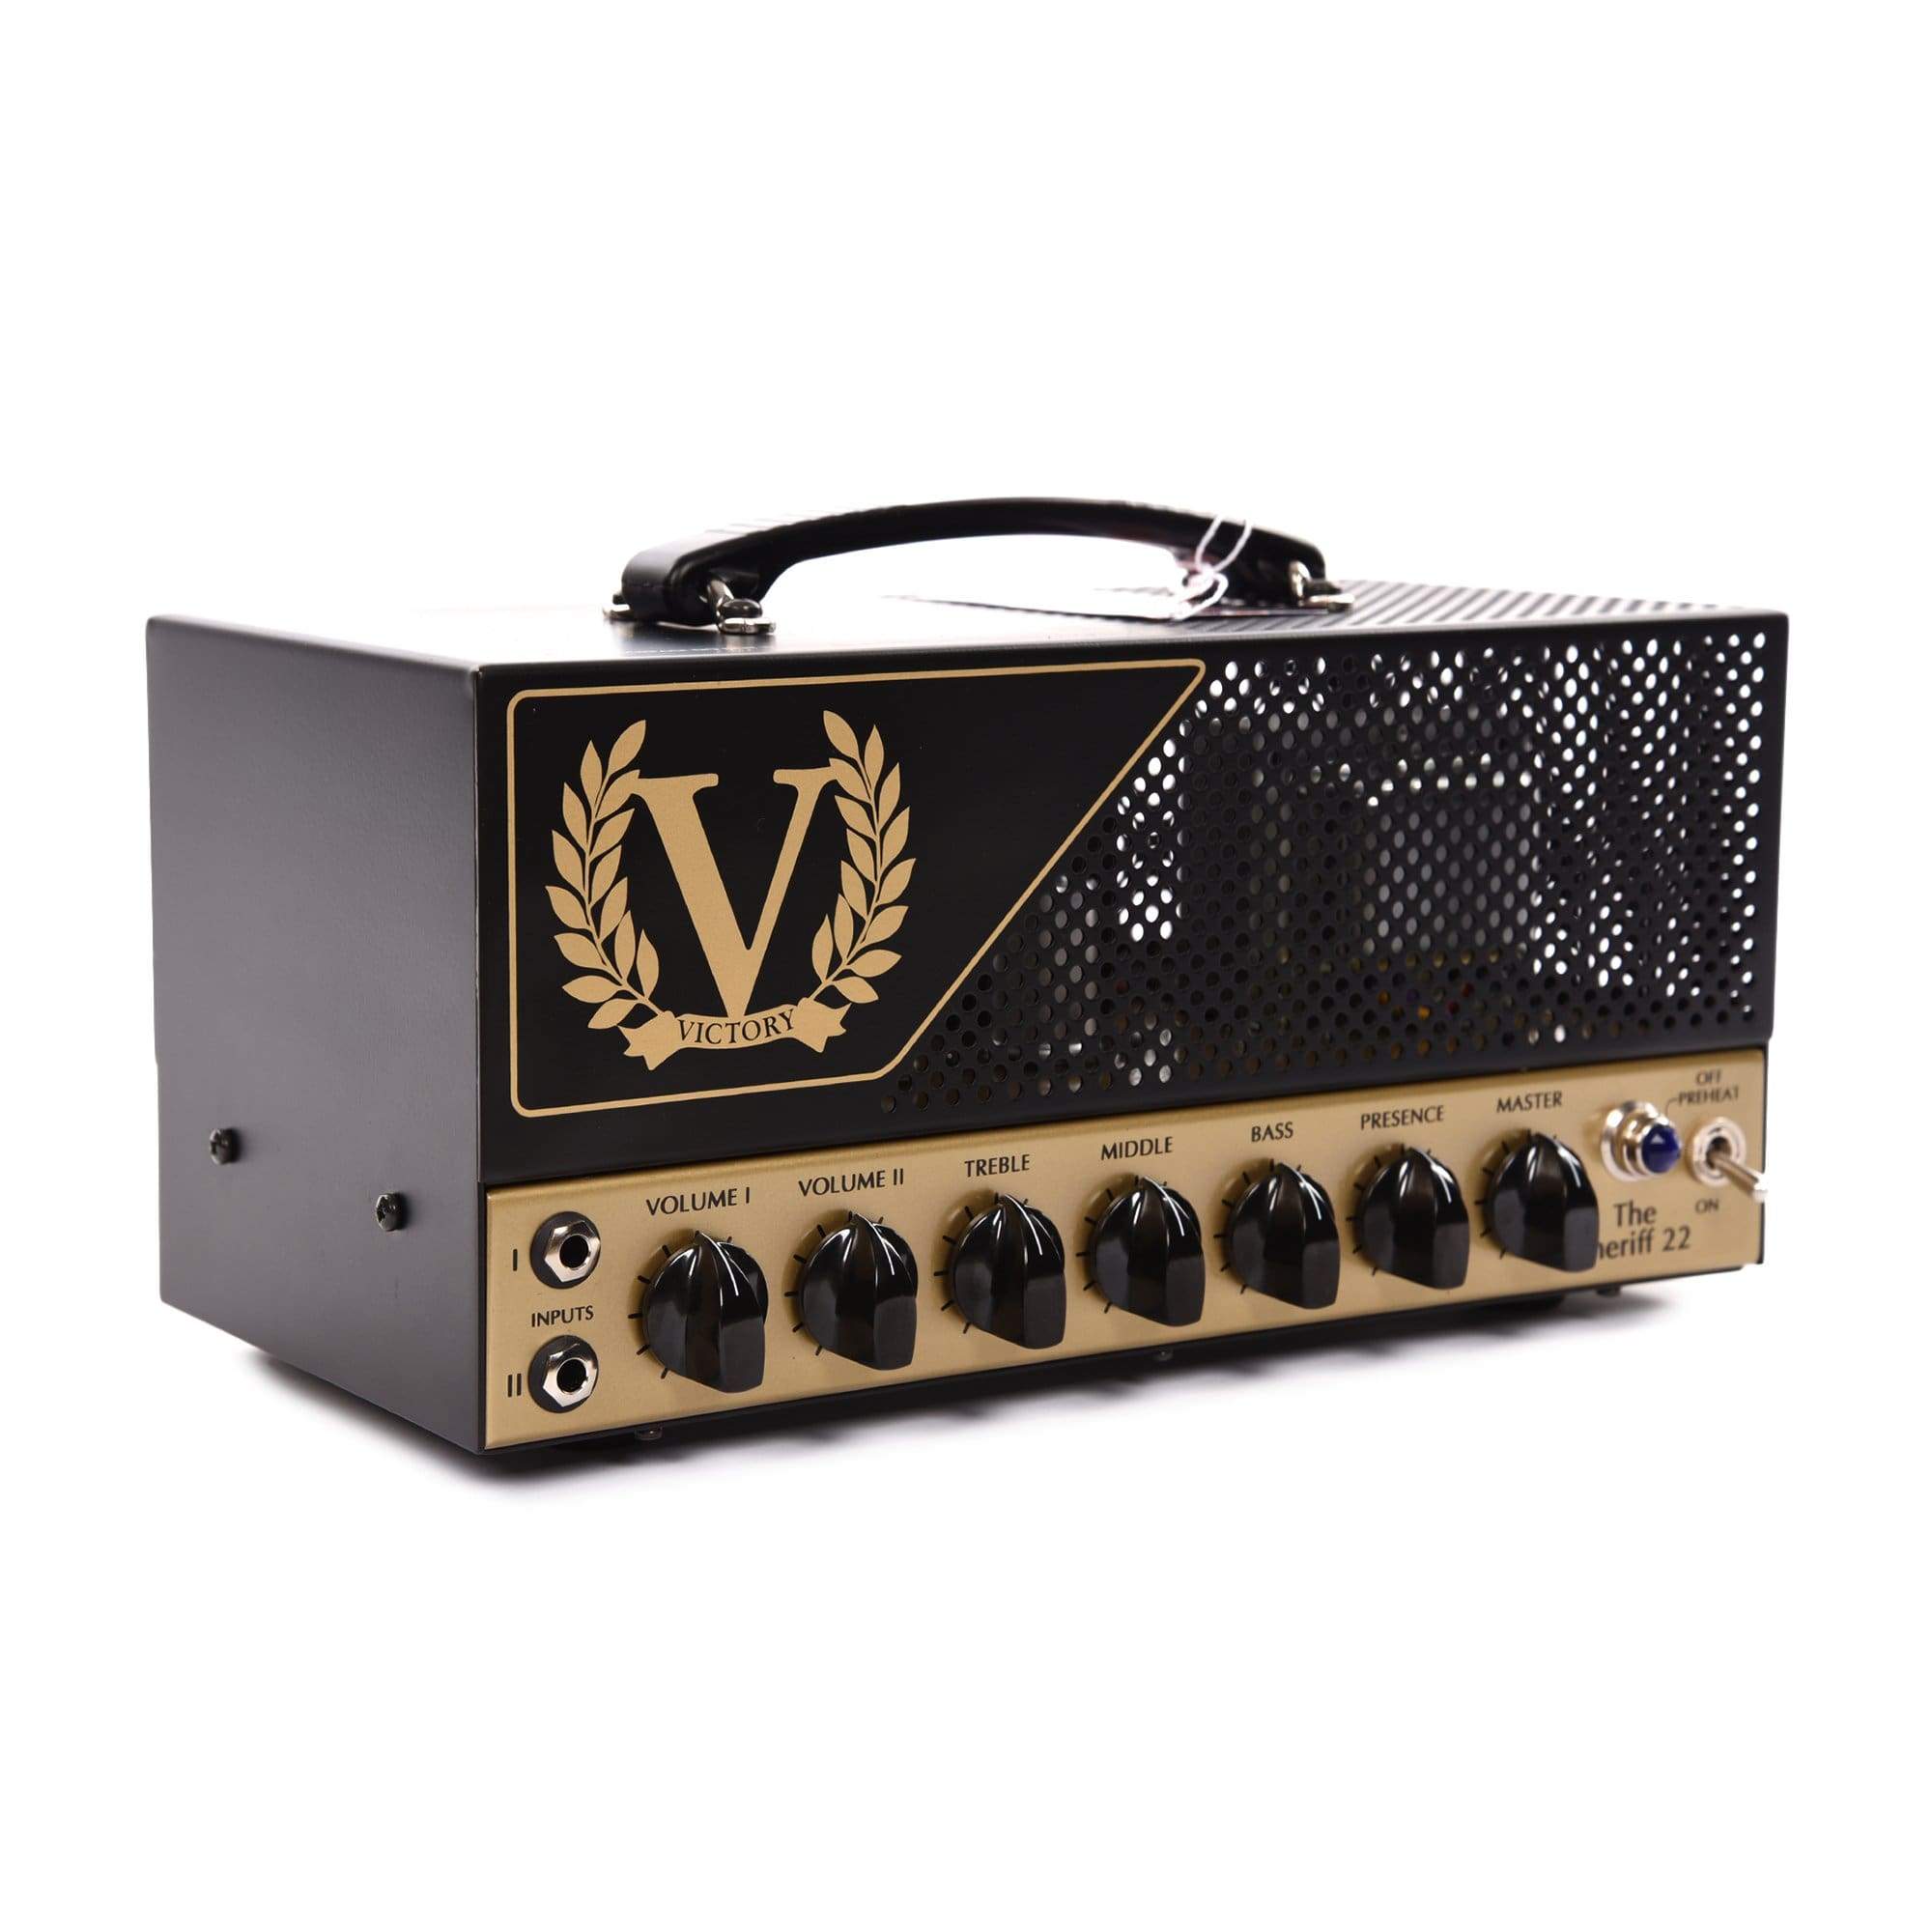 Victory The Sheriff 22 Compact Head Amps / Guitar Heads